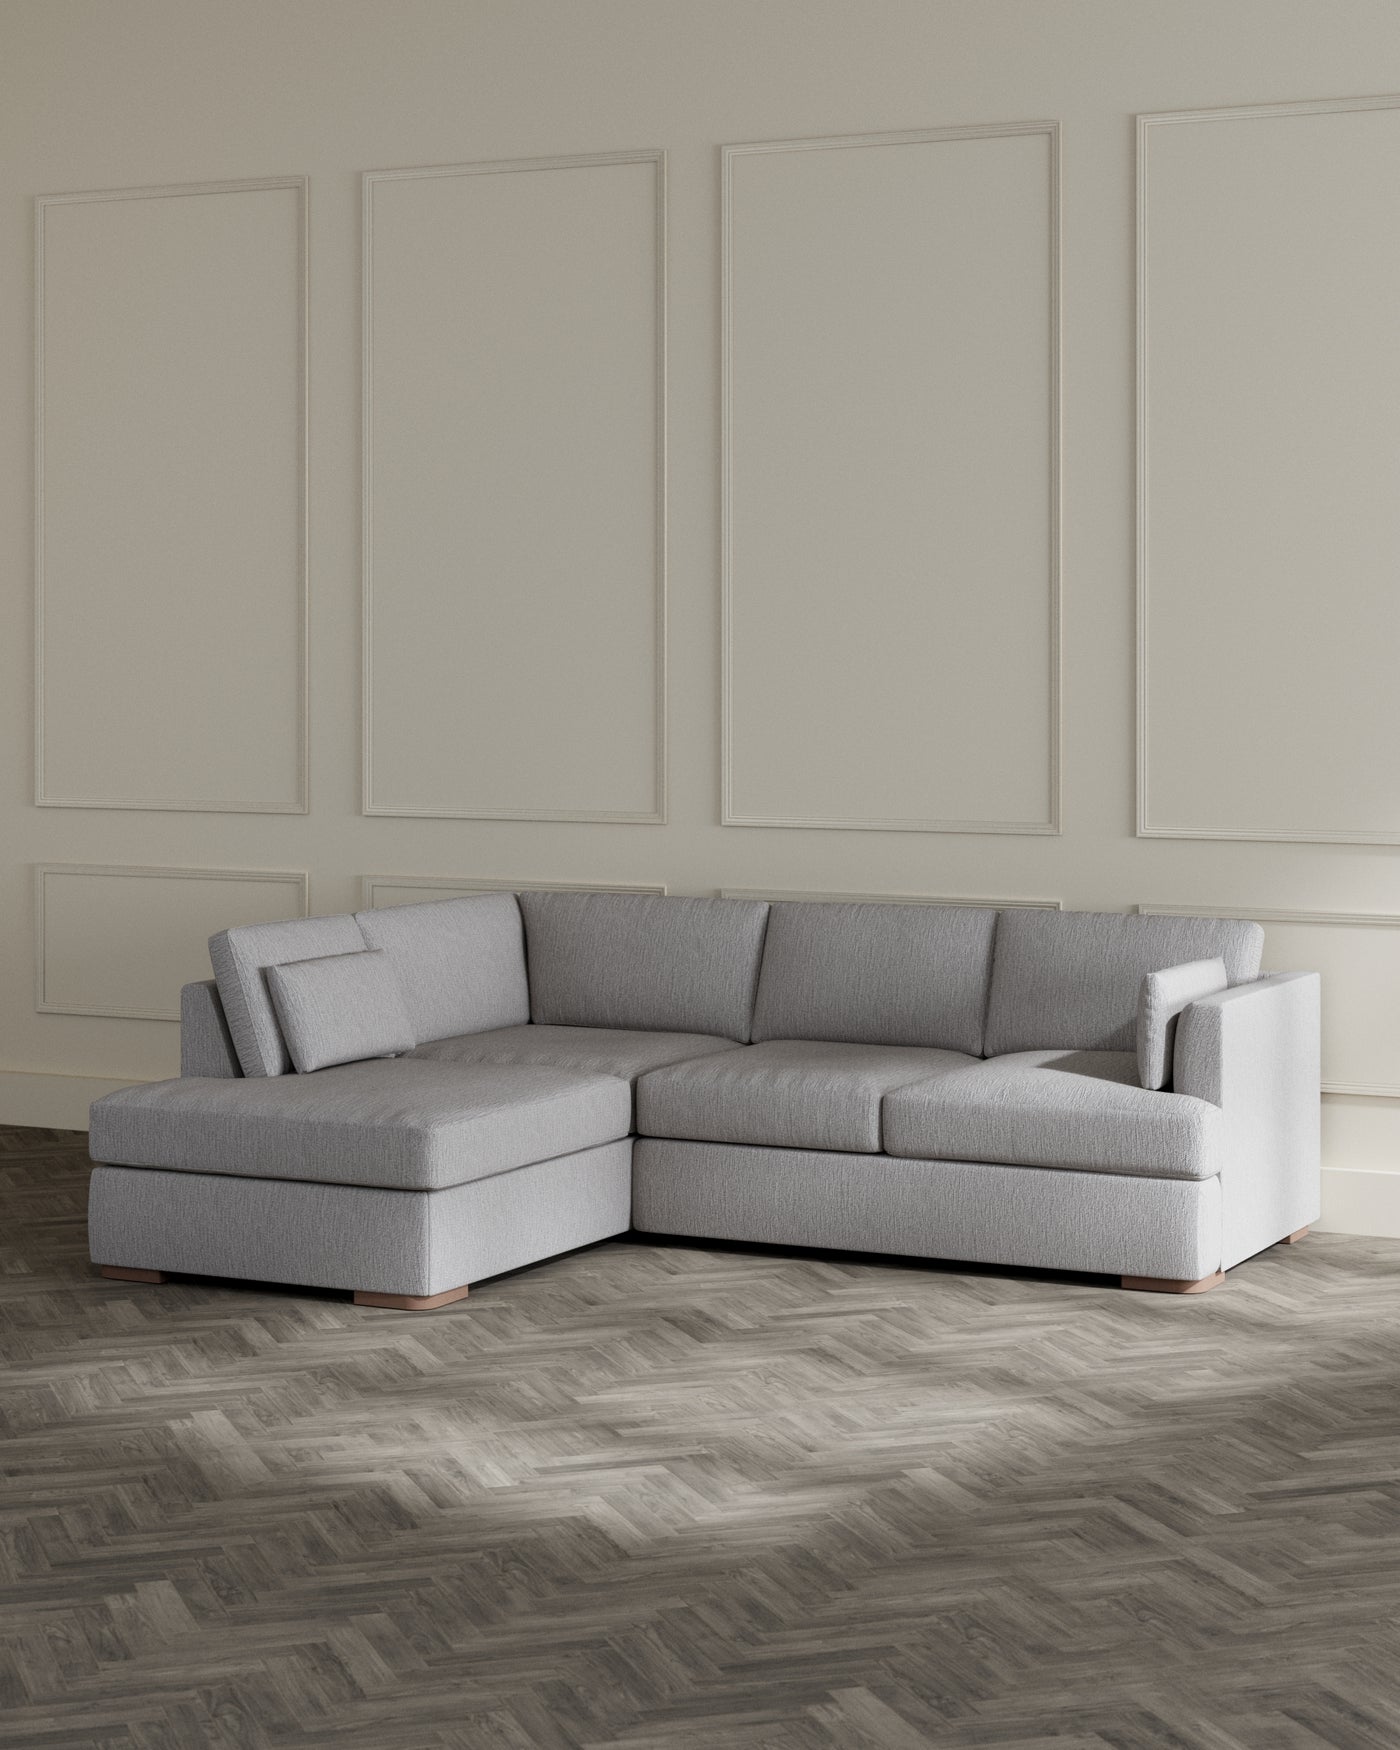 Modern light grey fabric L-shaped sectional sofa with chaise lounge, featuring clean lines, plush cushions, and wooden legs, showcased in a room with elegant wall panelling and herringbone wood flooring.